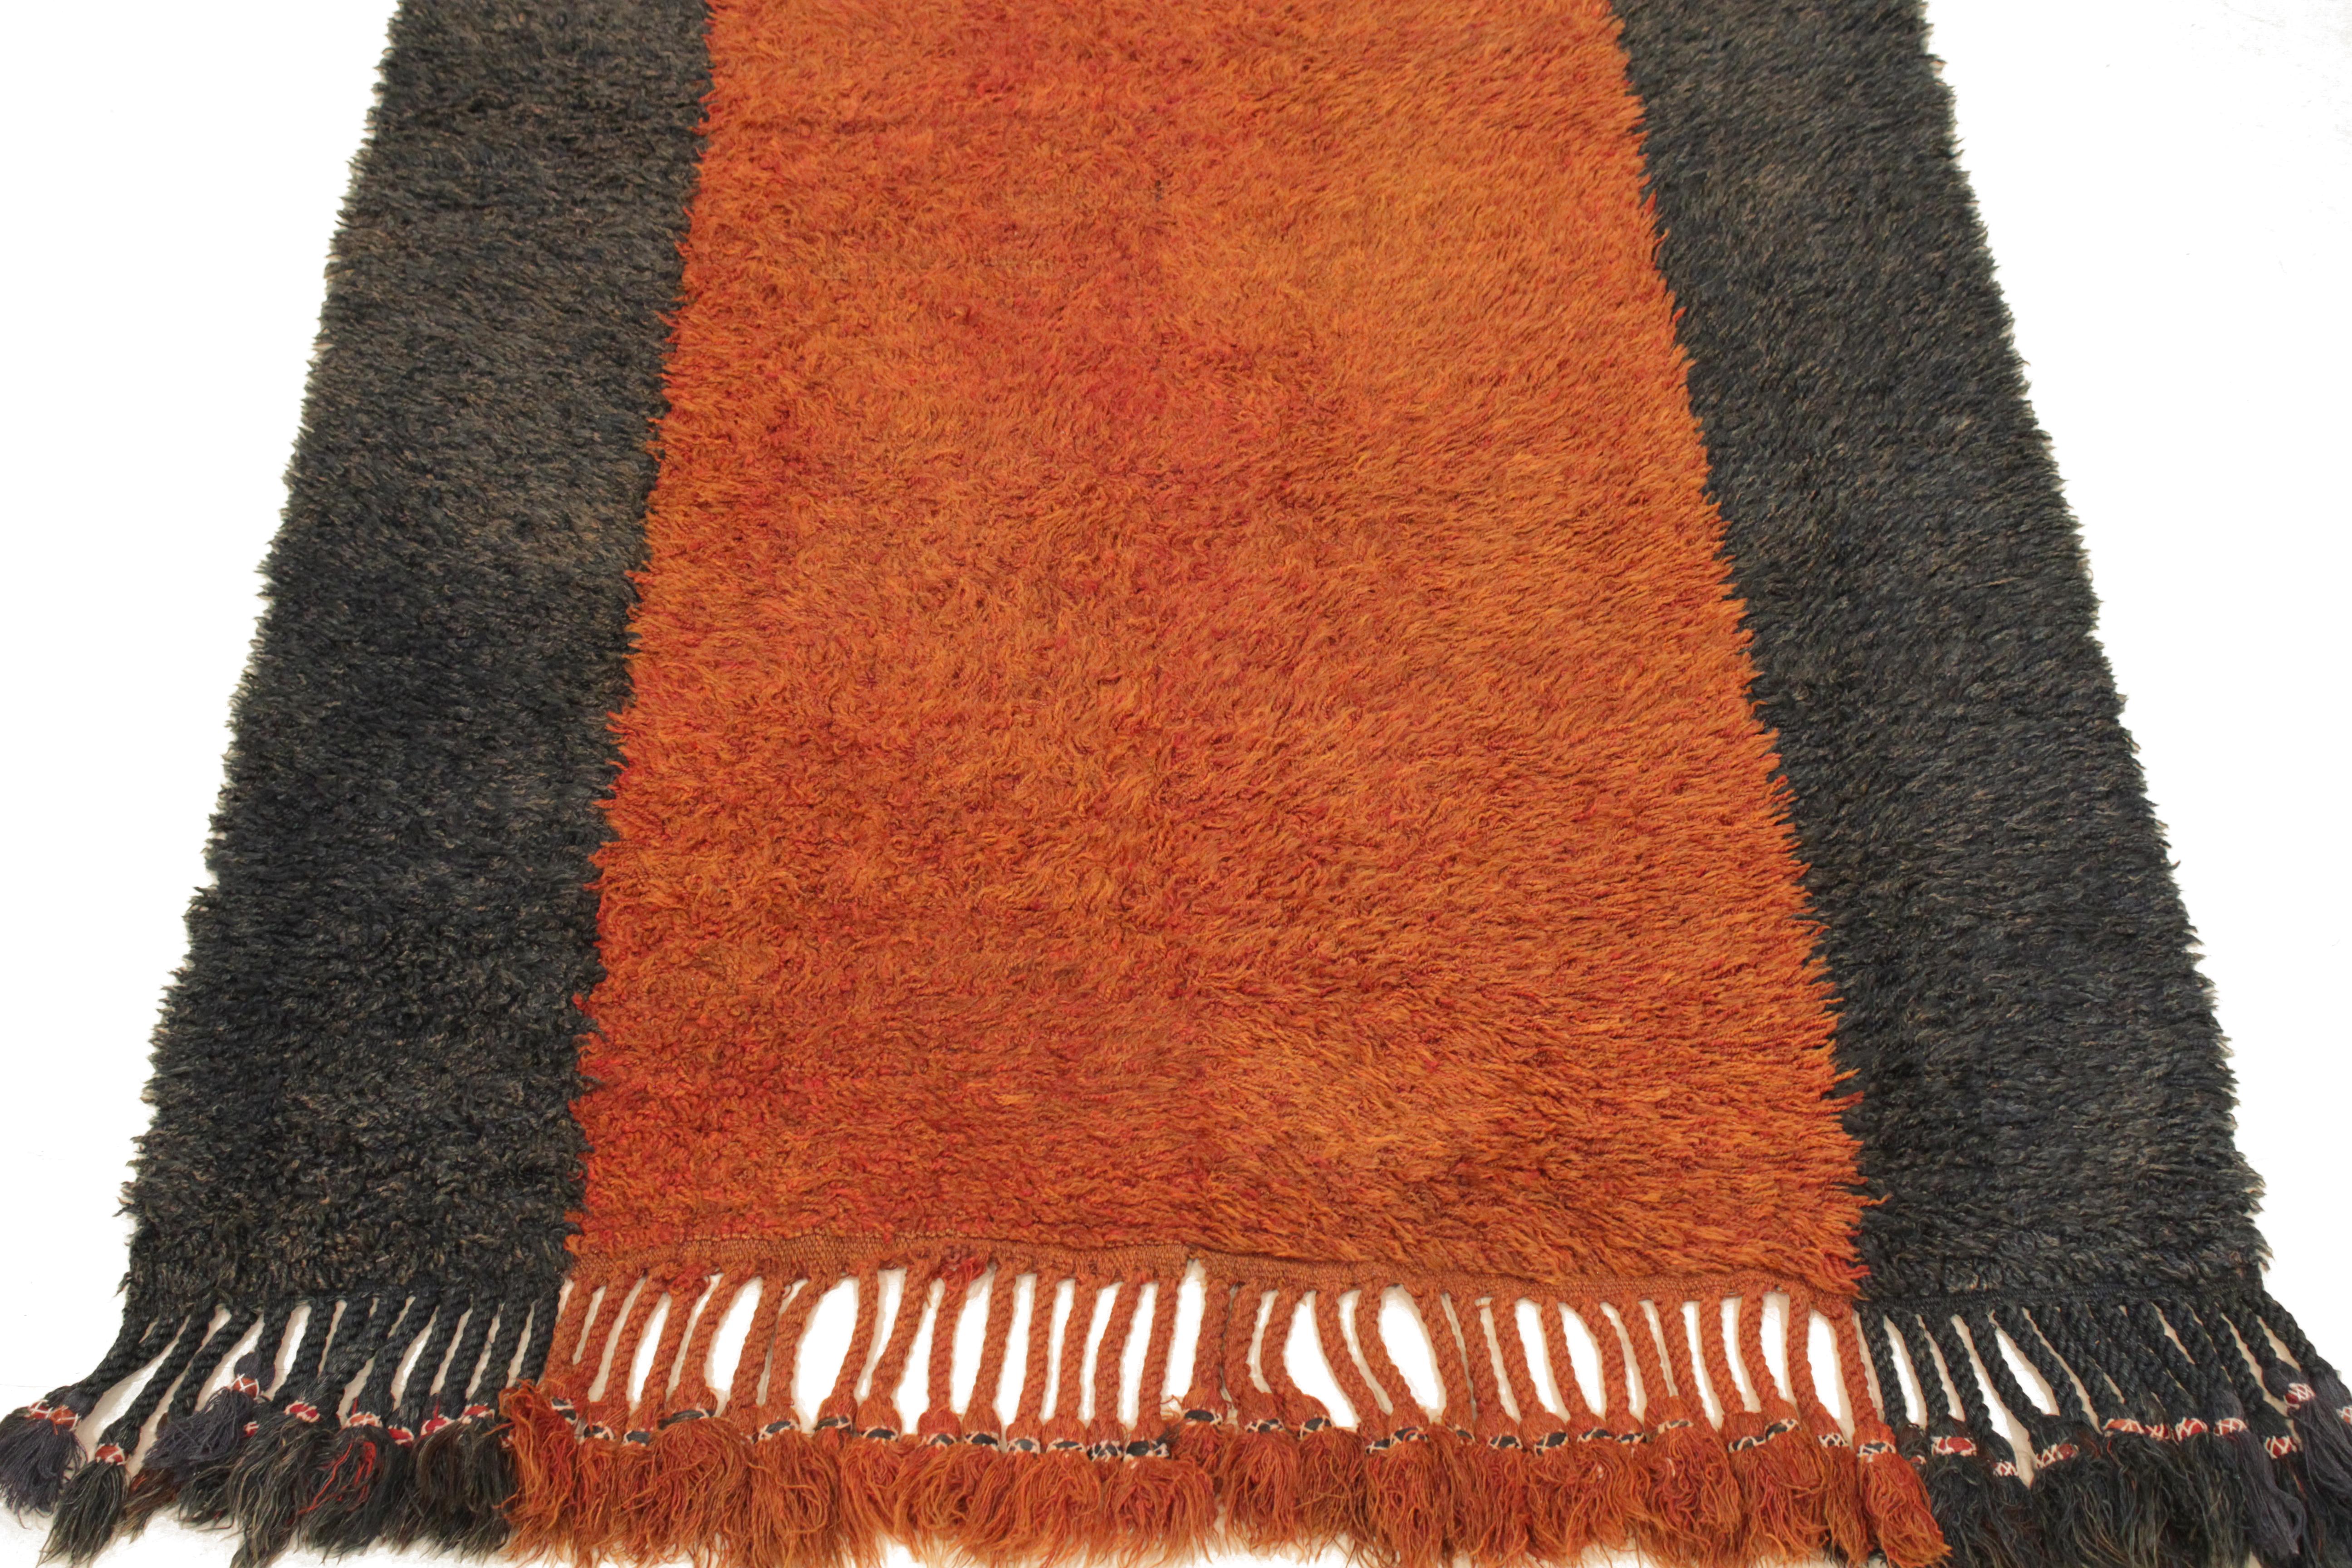 A stunning Uzbek julkhyr rug woven in three joined panels, composed of vertical stripes in indigo blue and madder brick red. The ancient modernity of tribal weavings such as this piece is testified by the minimalist flavour of the pattern. The silky